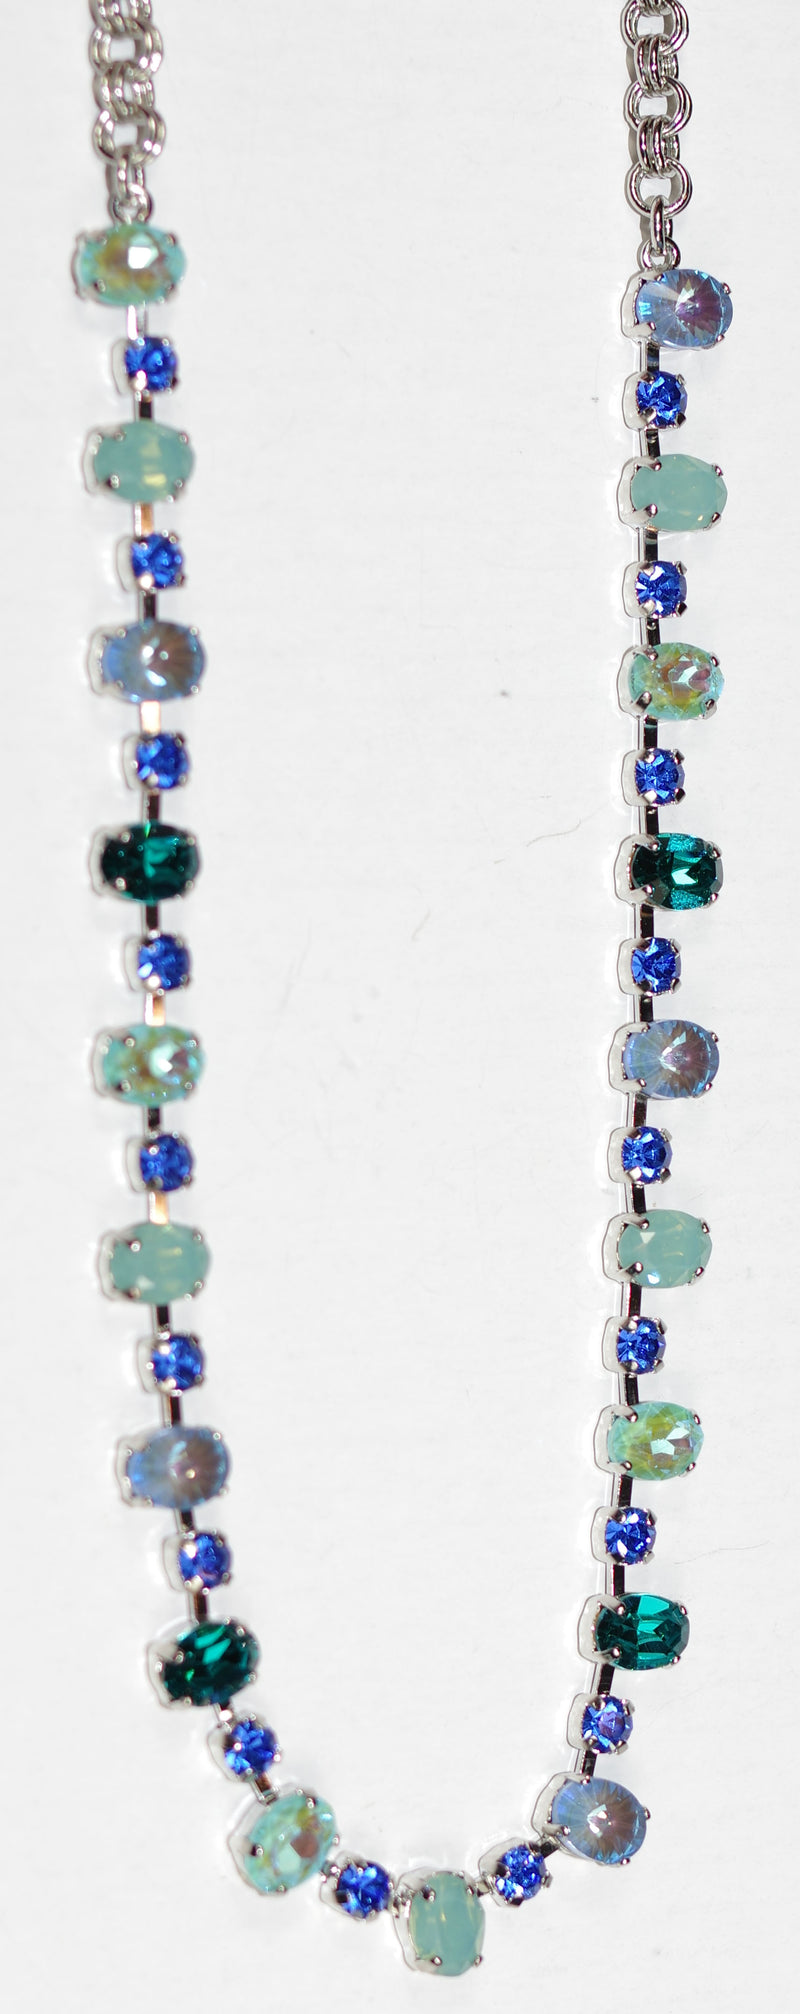 MARIANA NECKLACE SERENITY: blue, teal, pacific opal, sun kissed stones in silver rhodium setting, 18" adjustable chain